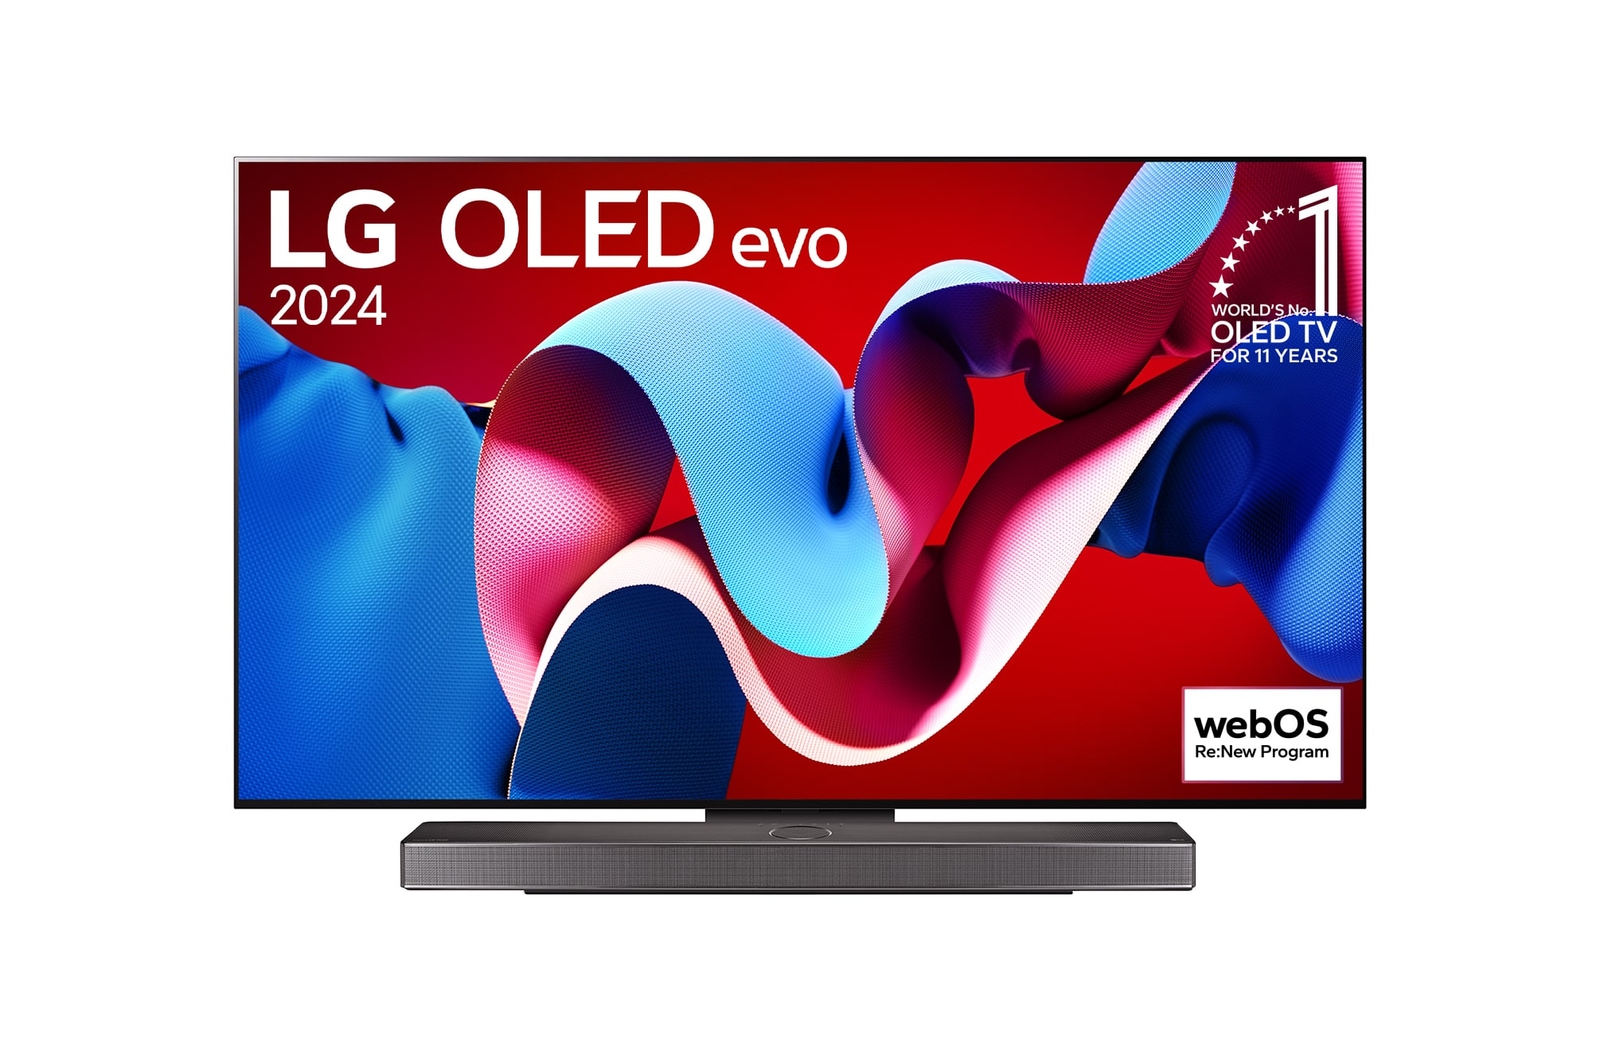 Front view with LG OLED evo AI TV, OLED C4, 11 Years of world number 1 OLED Emblem logo and webOS Re:New Program logo on screen, as well as the Soundbar below